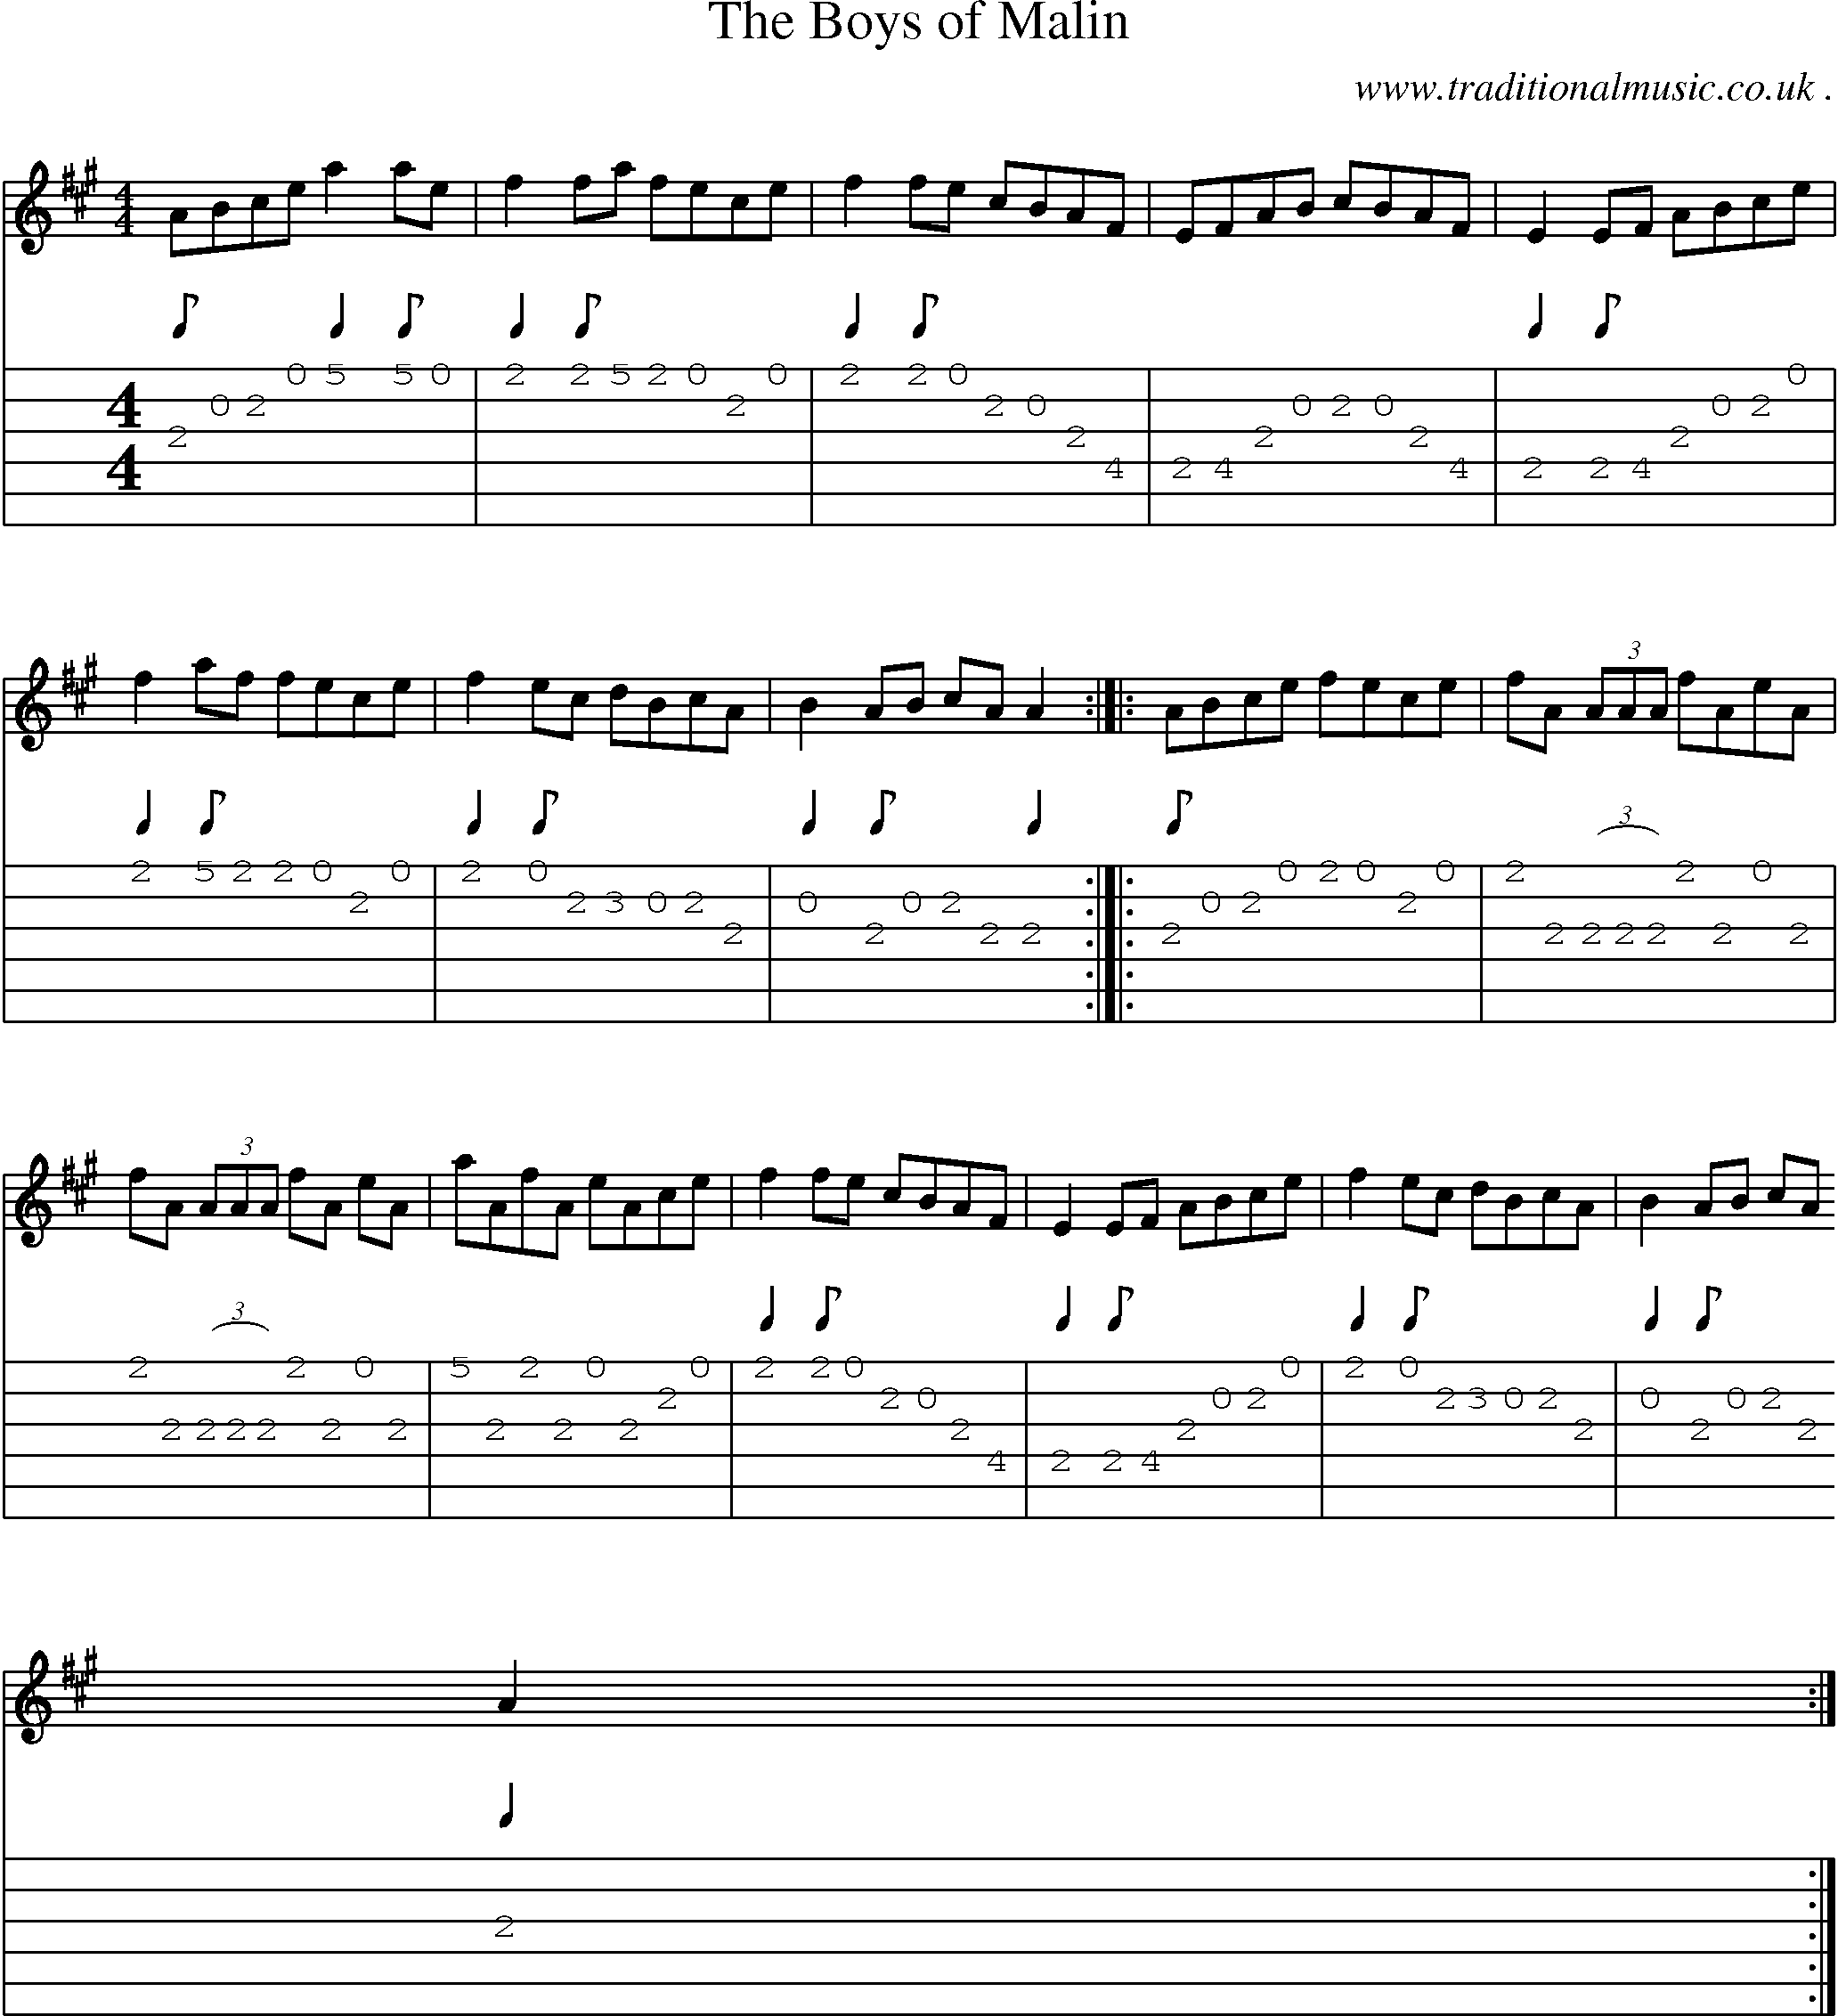 Sheet-Music and Guitar Tabs for The Boys Of Malin